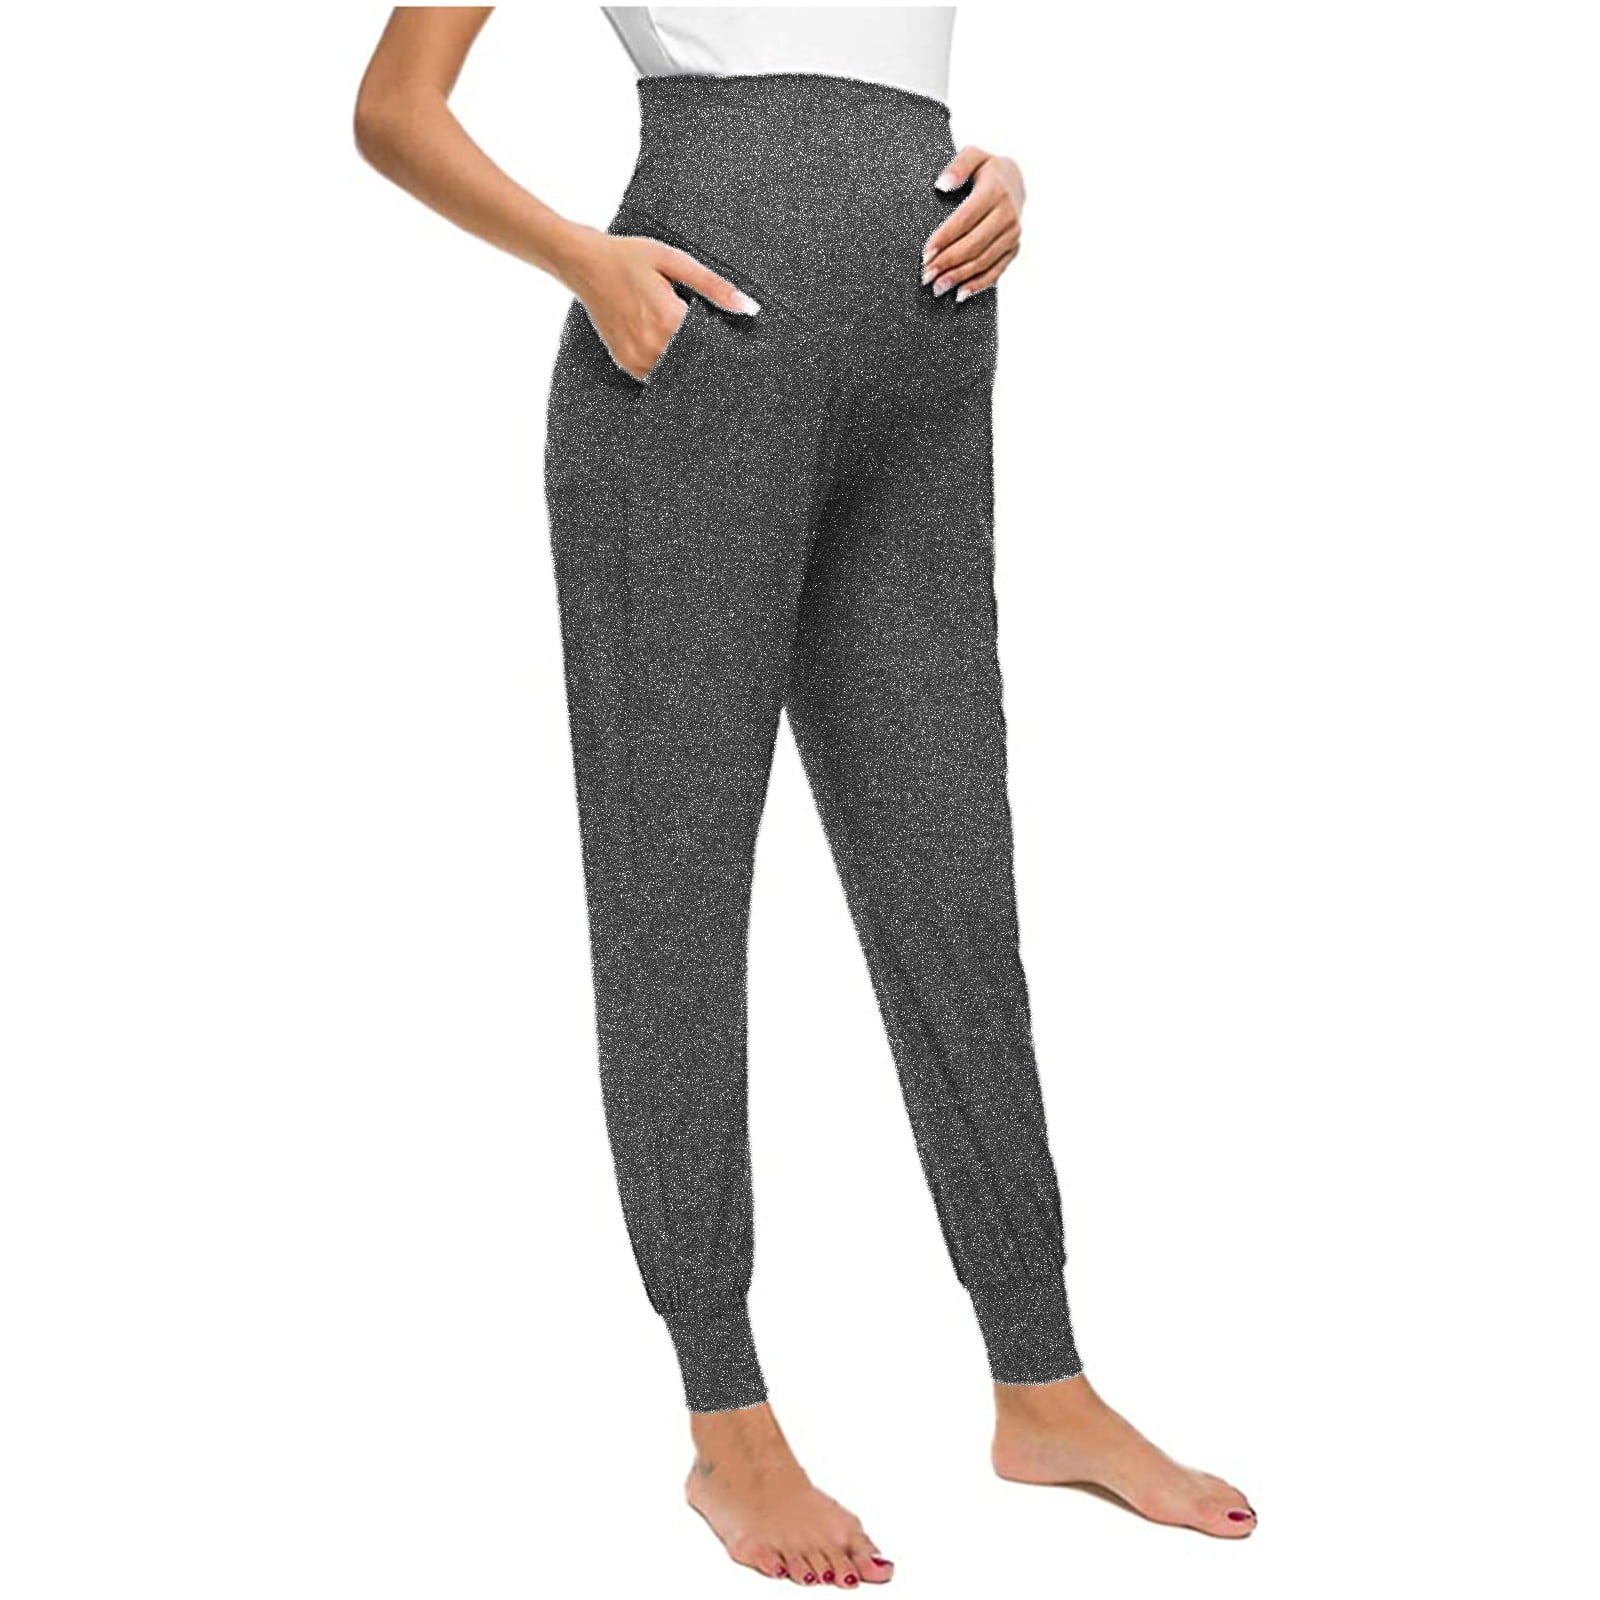 Clothes Tall Women Maternity Stretchy Pants Color Solid Maternity